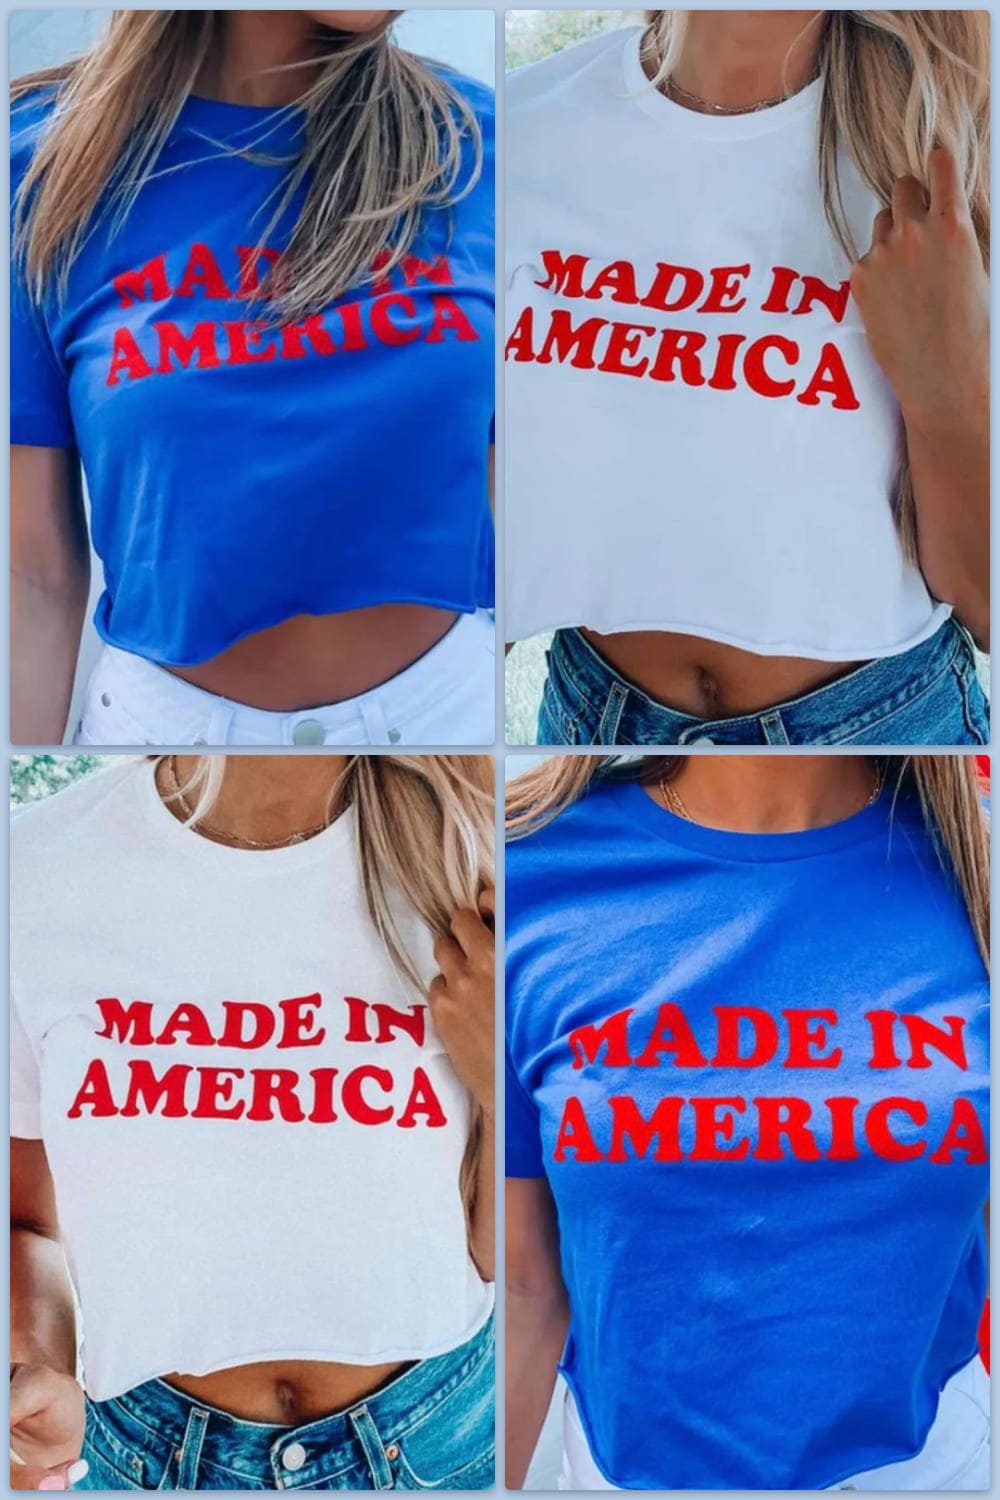 Made in America T-shirts.